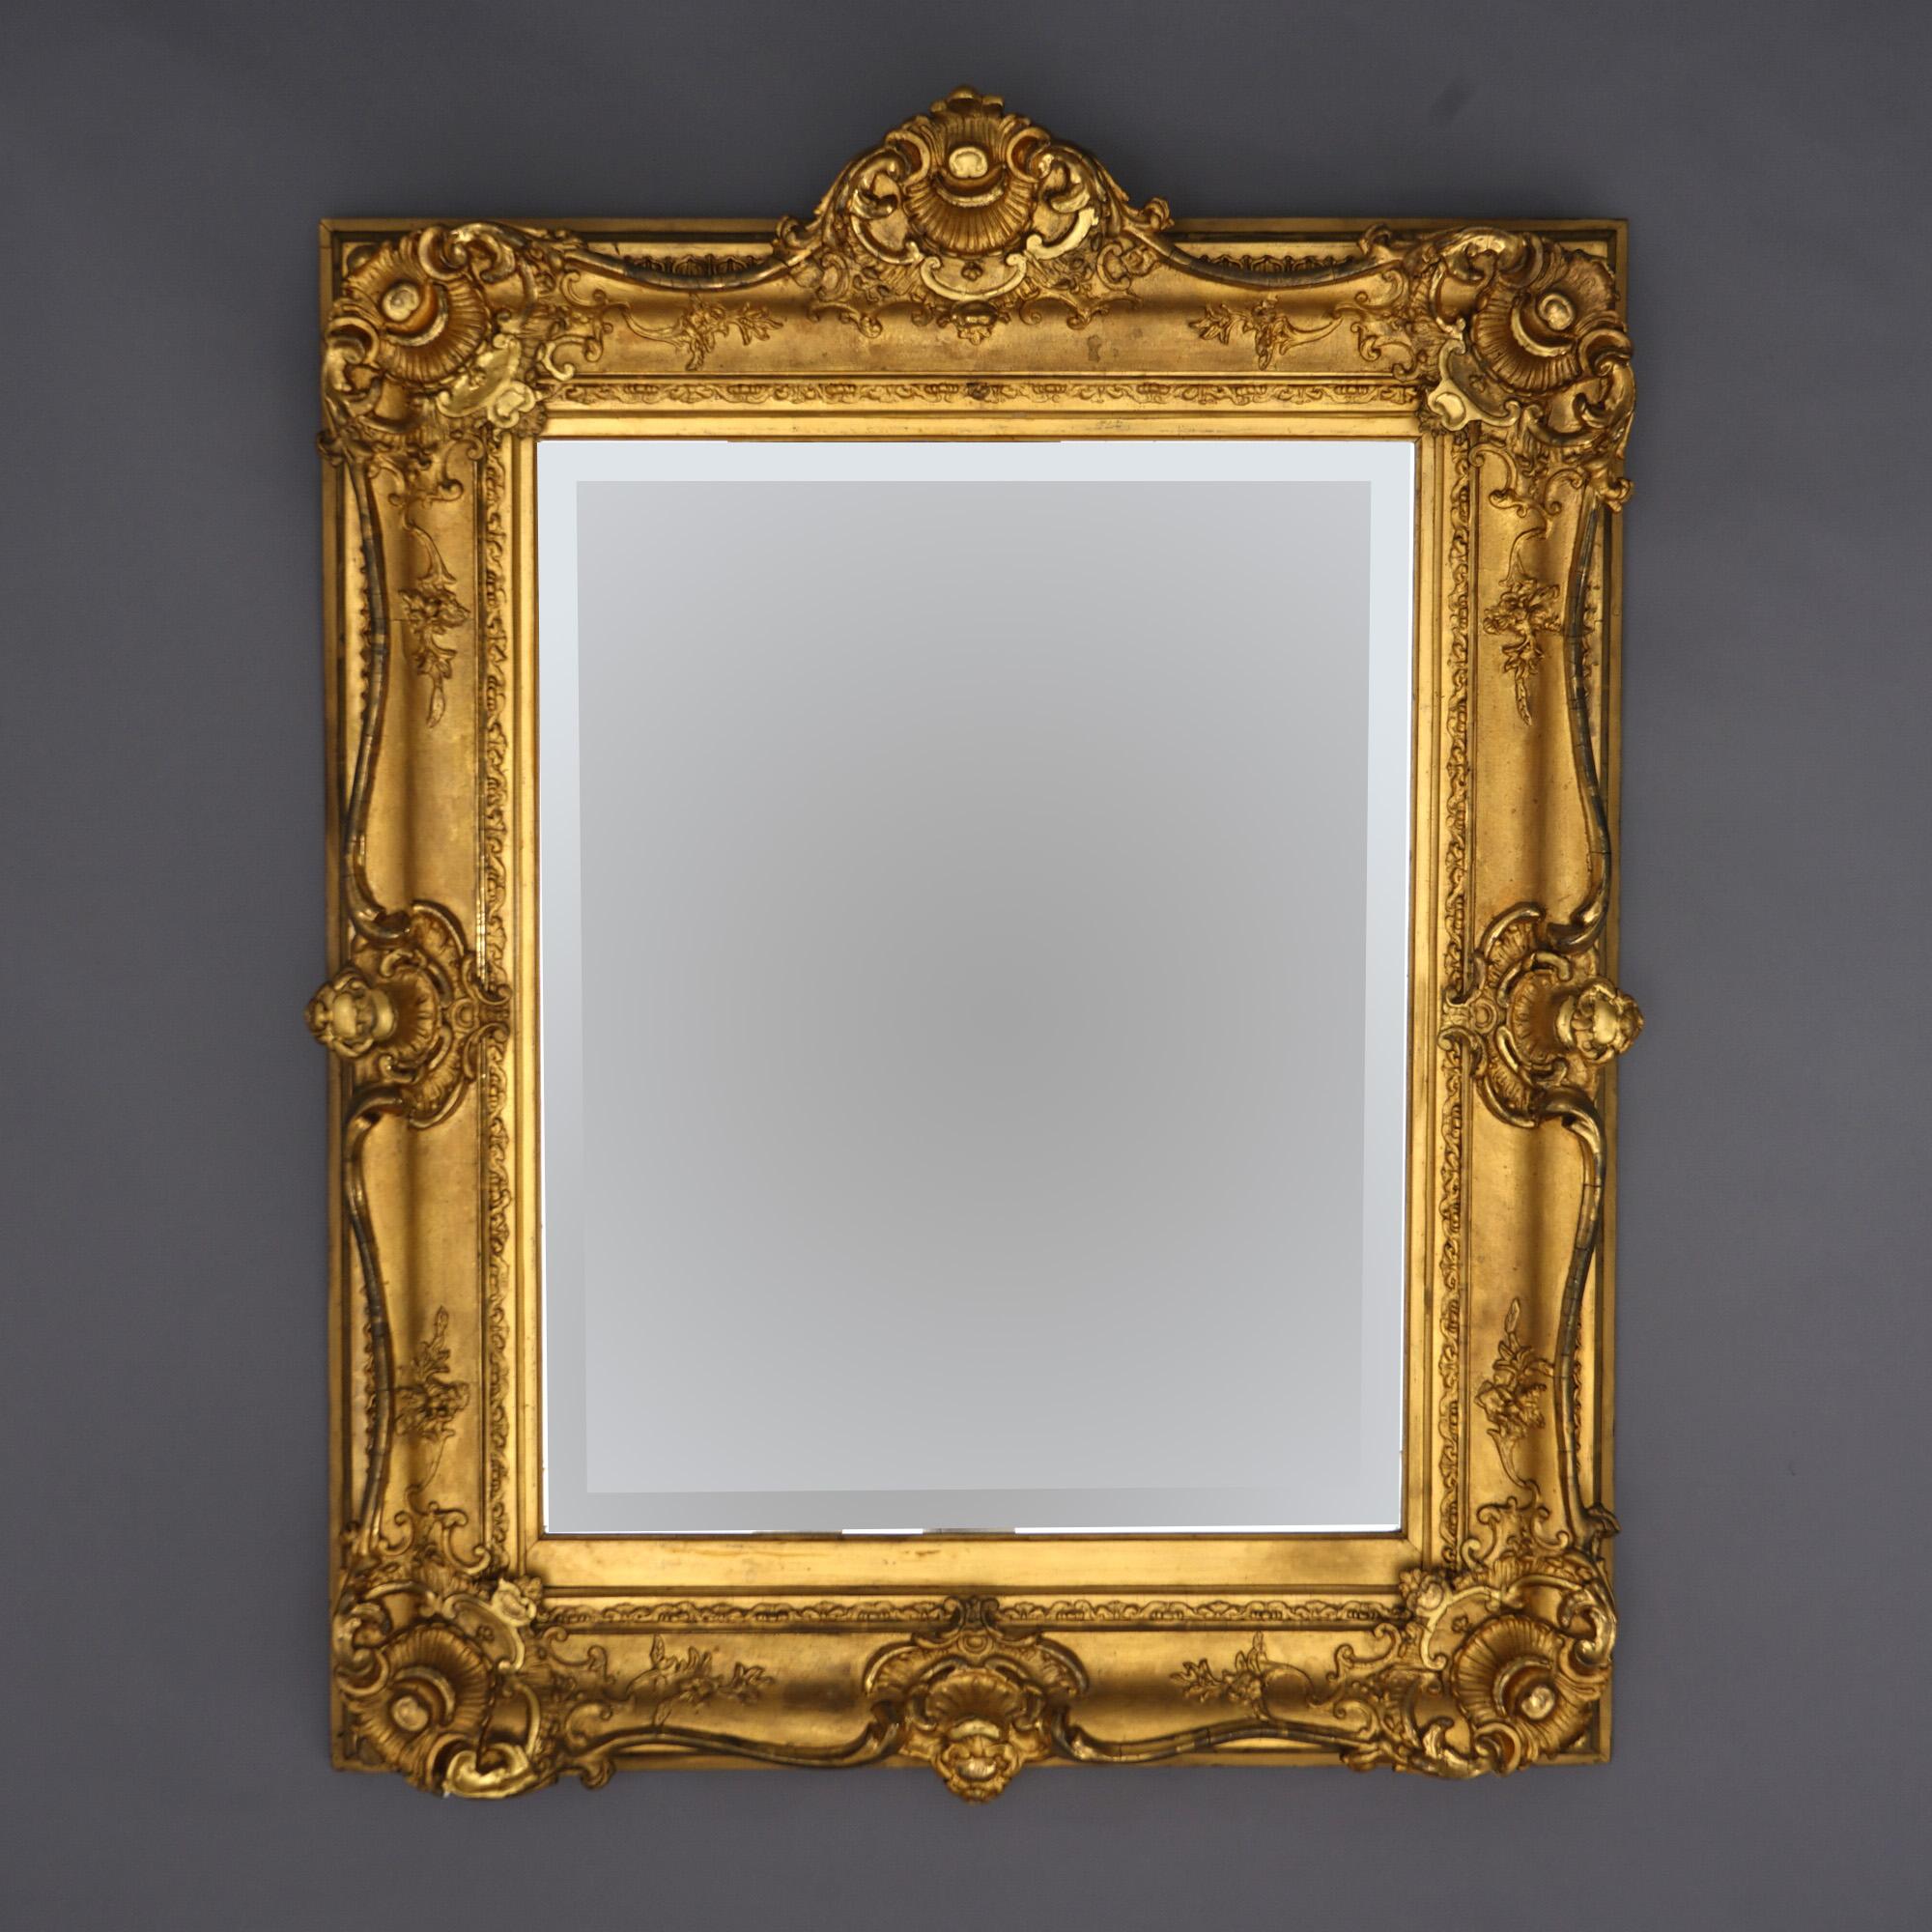 An antique and large French Renaissance wall mirror offers a giltwood frame with shell and foliate elements, beveled mirror, 19th century

Measures - 47.5